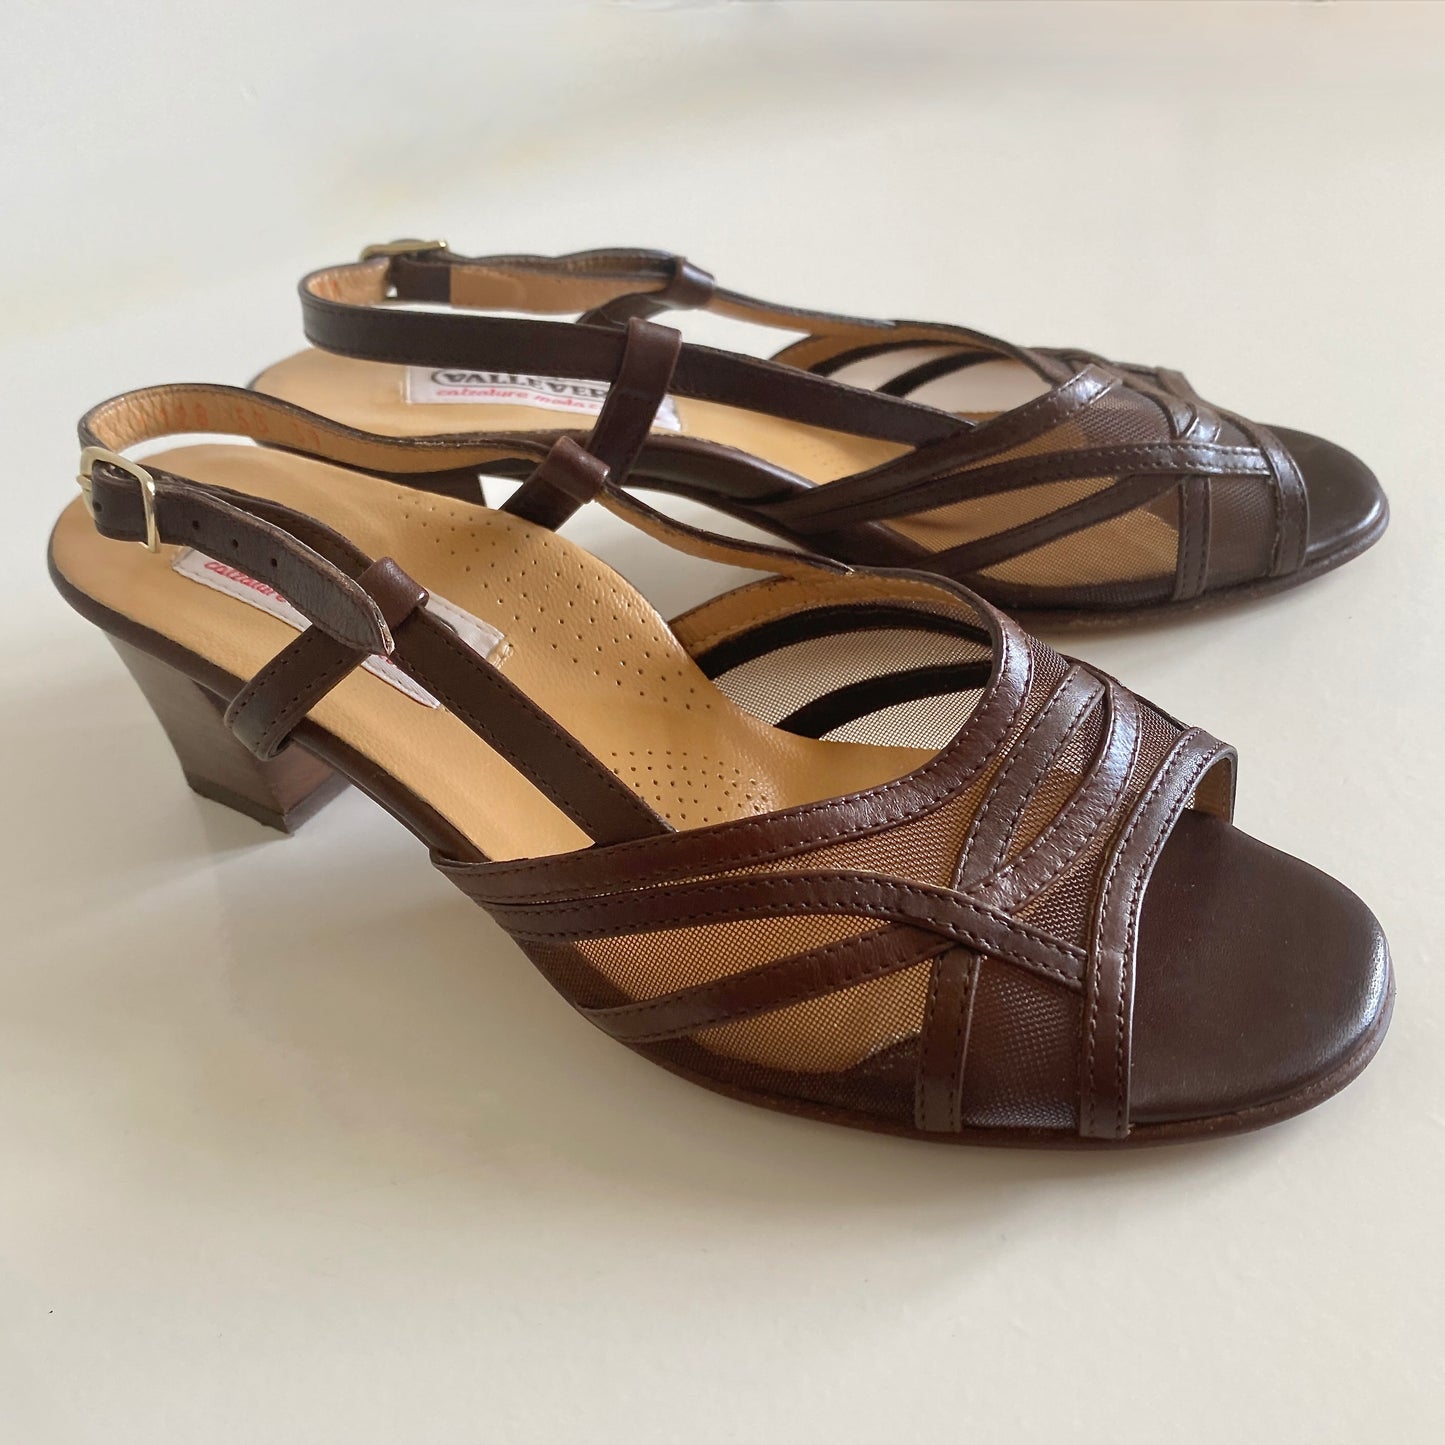 Brown Leather and mesh sandals By Valleverde Adjustable back strap Leather Cushioned footbed Size Euro 37 UK size 4 Heel height 2"